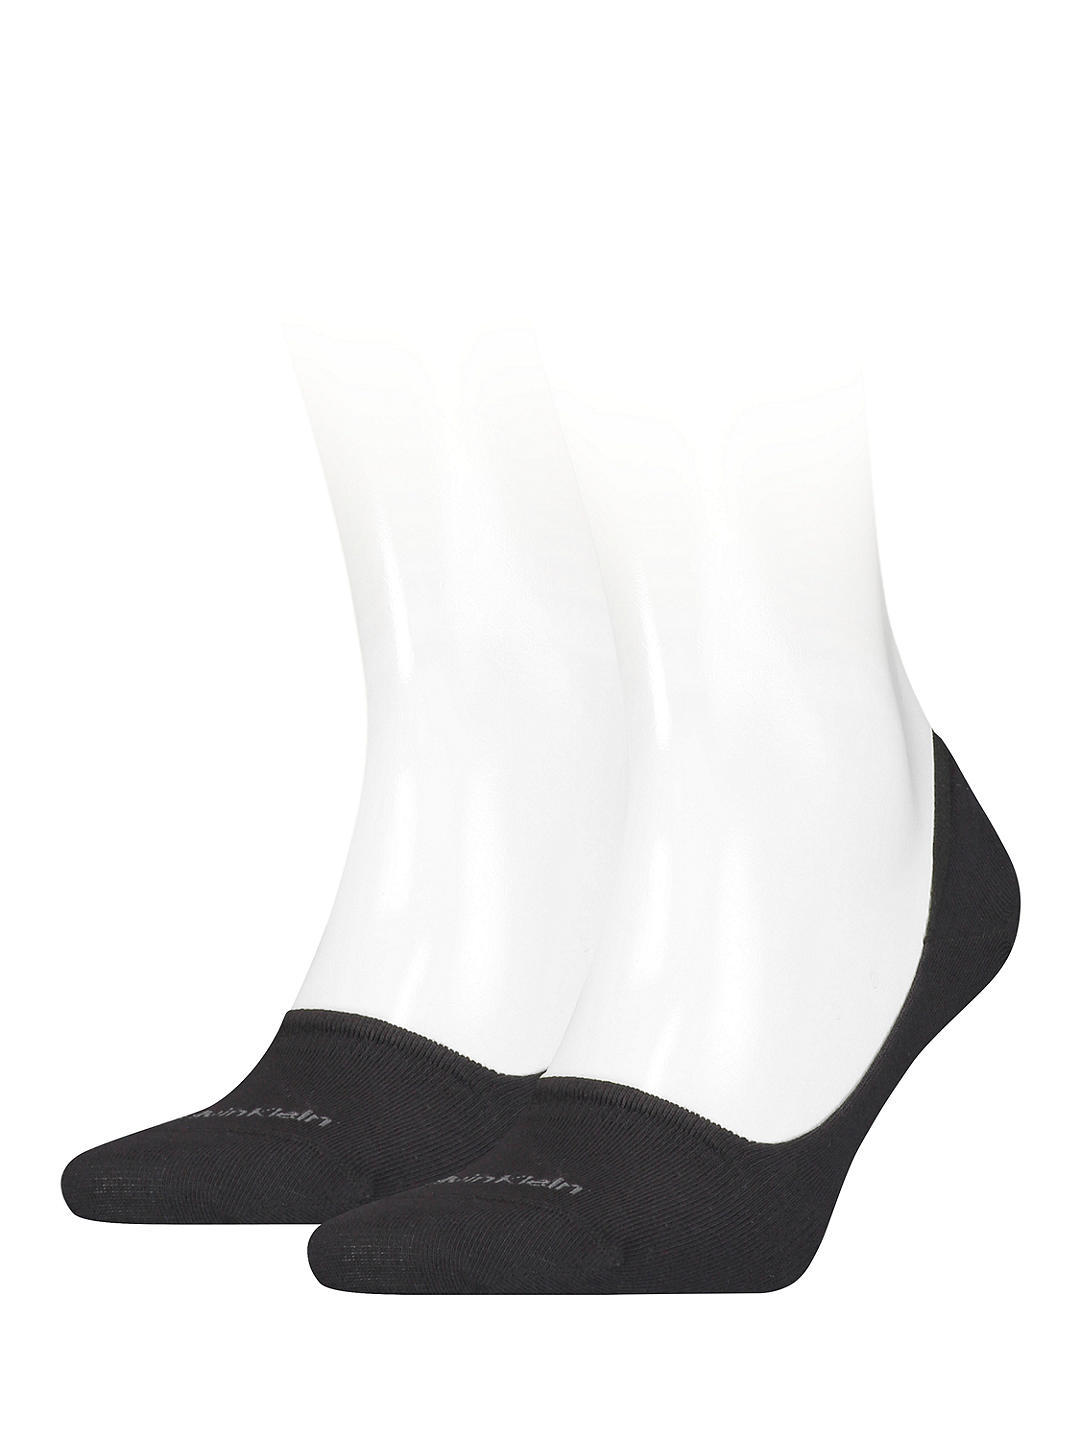 Calvin Klein Invisible Trainer Liner Cotton Socks, Pack of 2, 001 Black